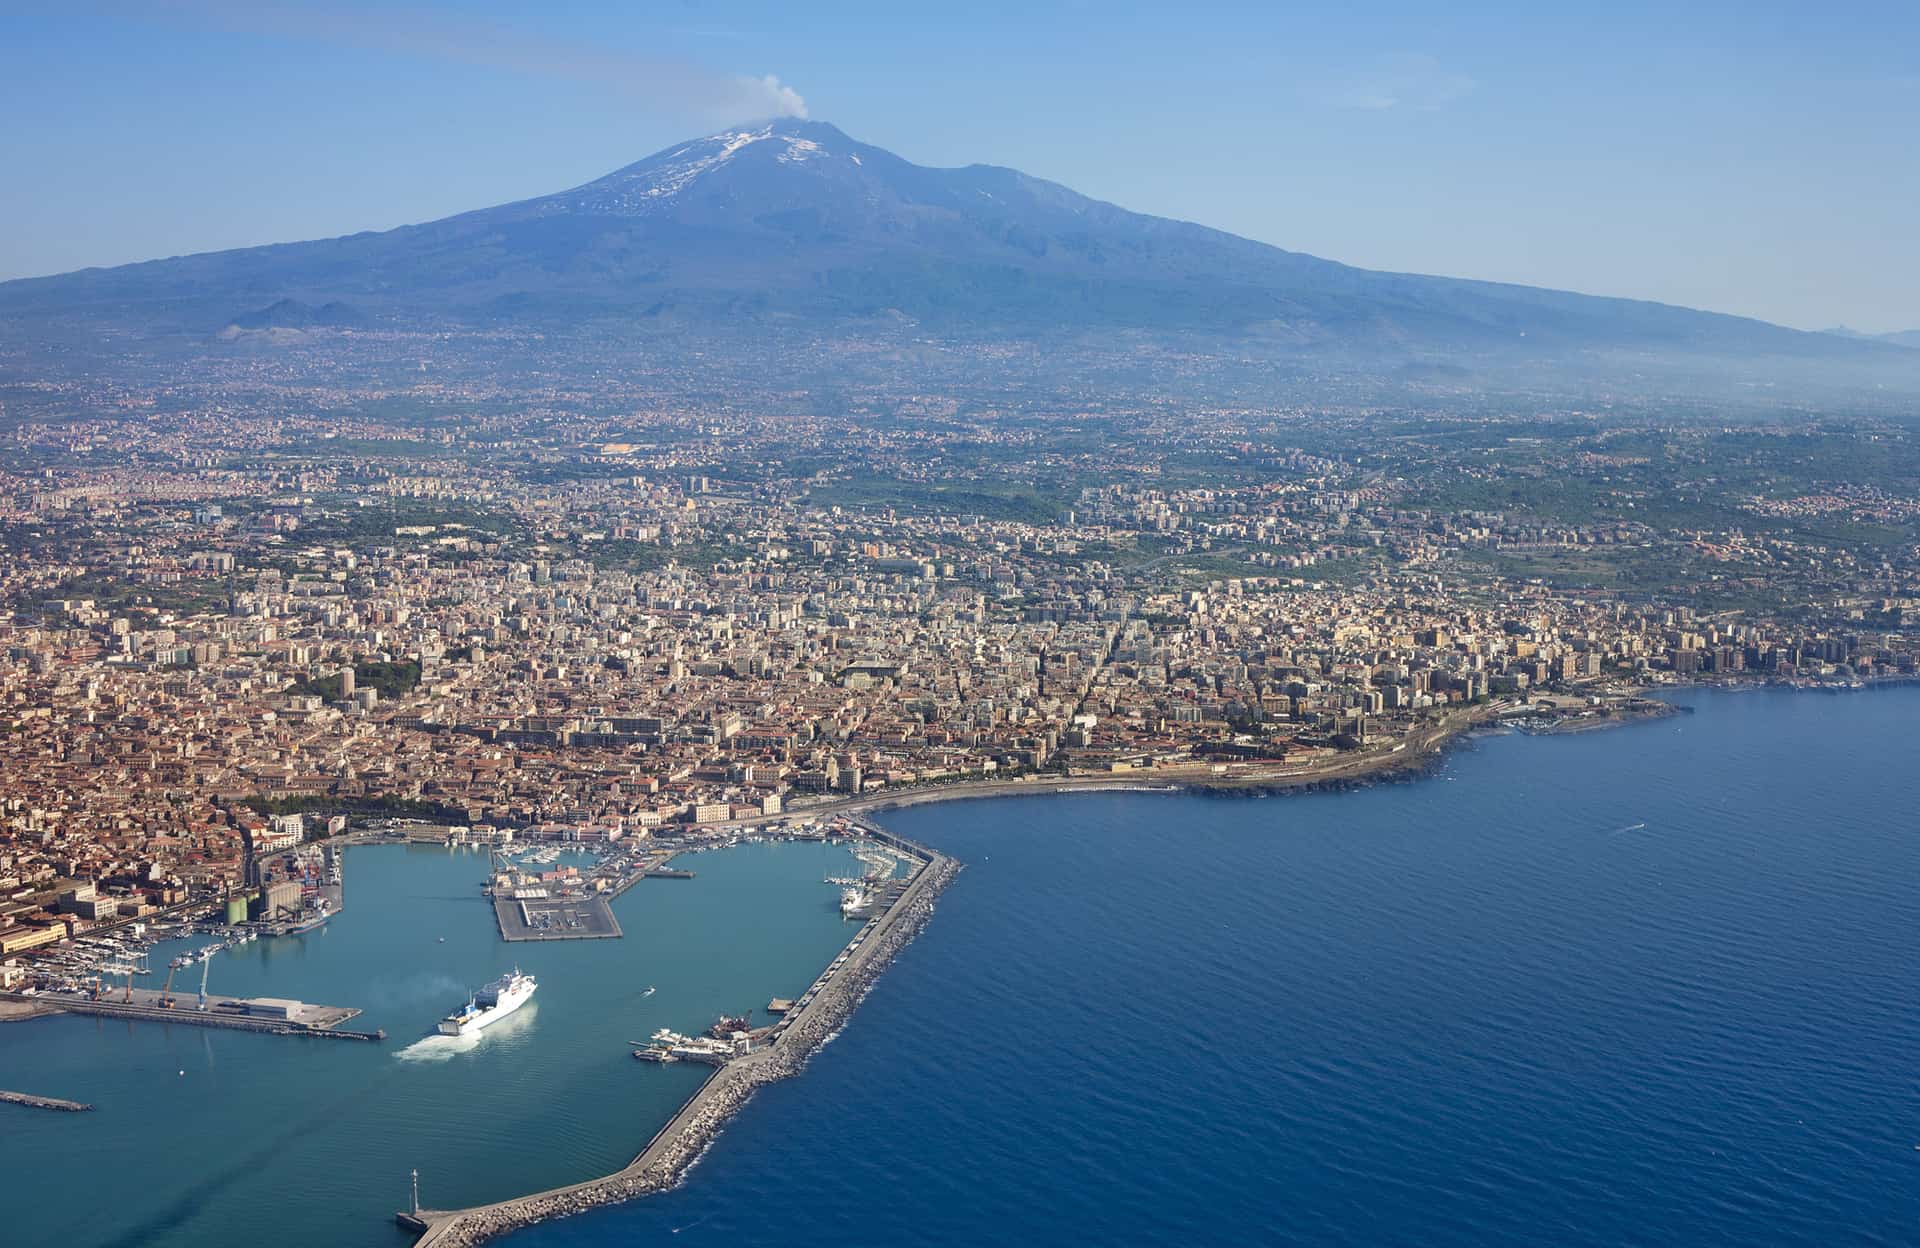 Air photo of Catania city in Sicily with the Etna Volcano in the back.